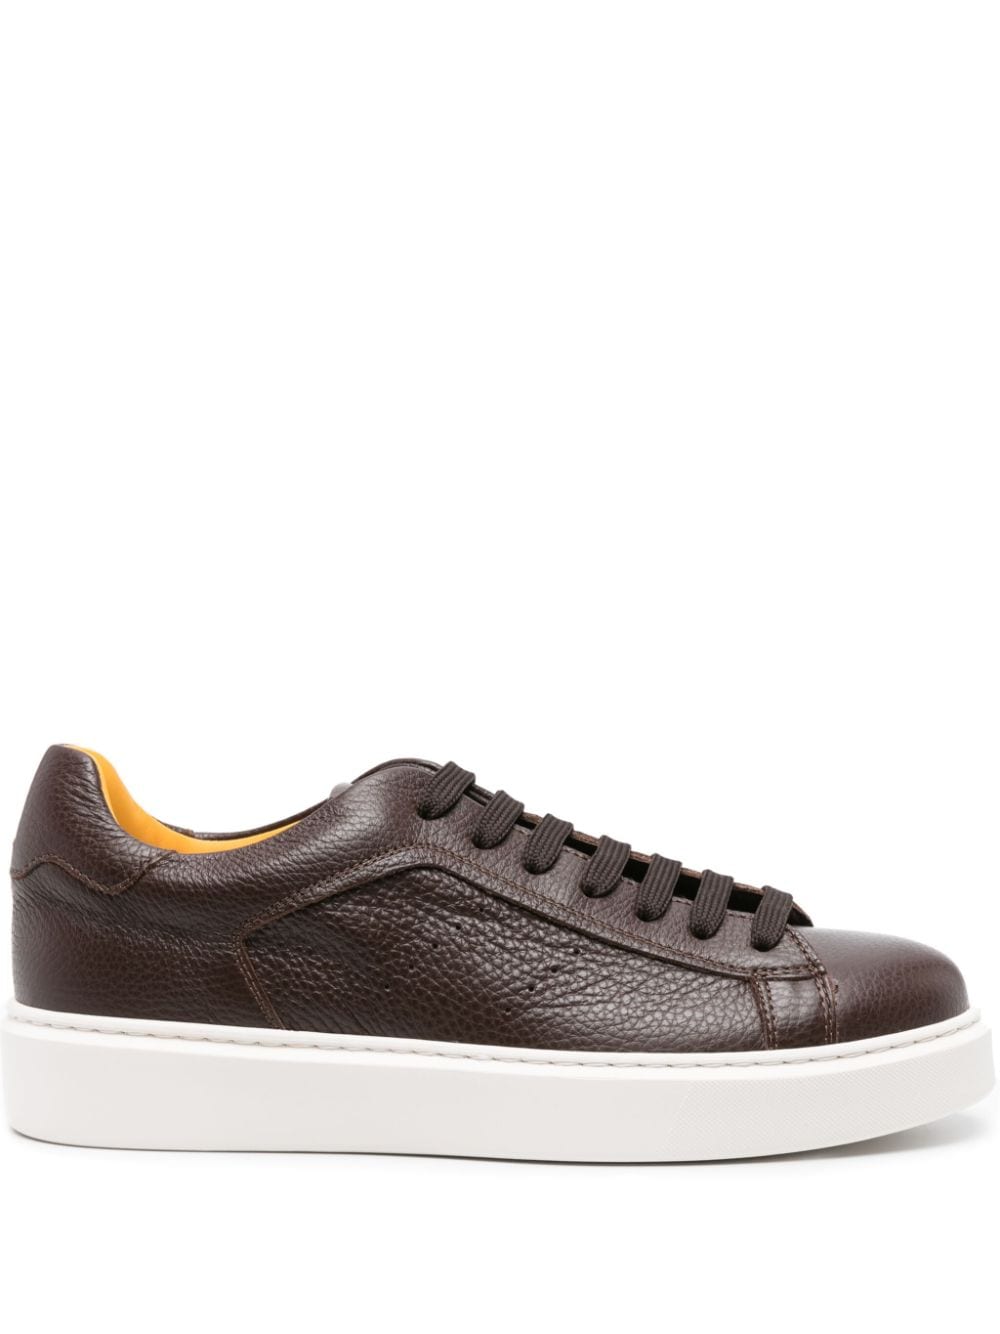 Doucal's logo-patch leather sneakers - Brown von Doucal's